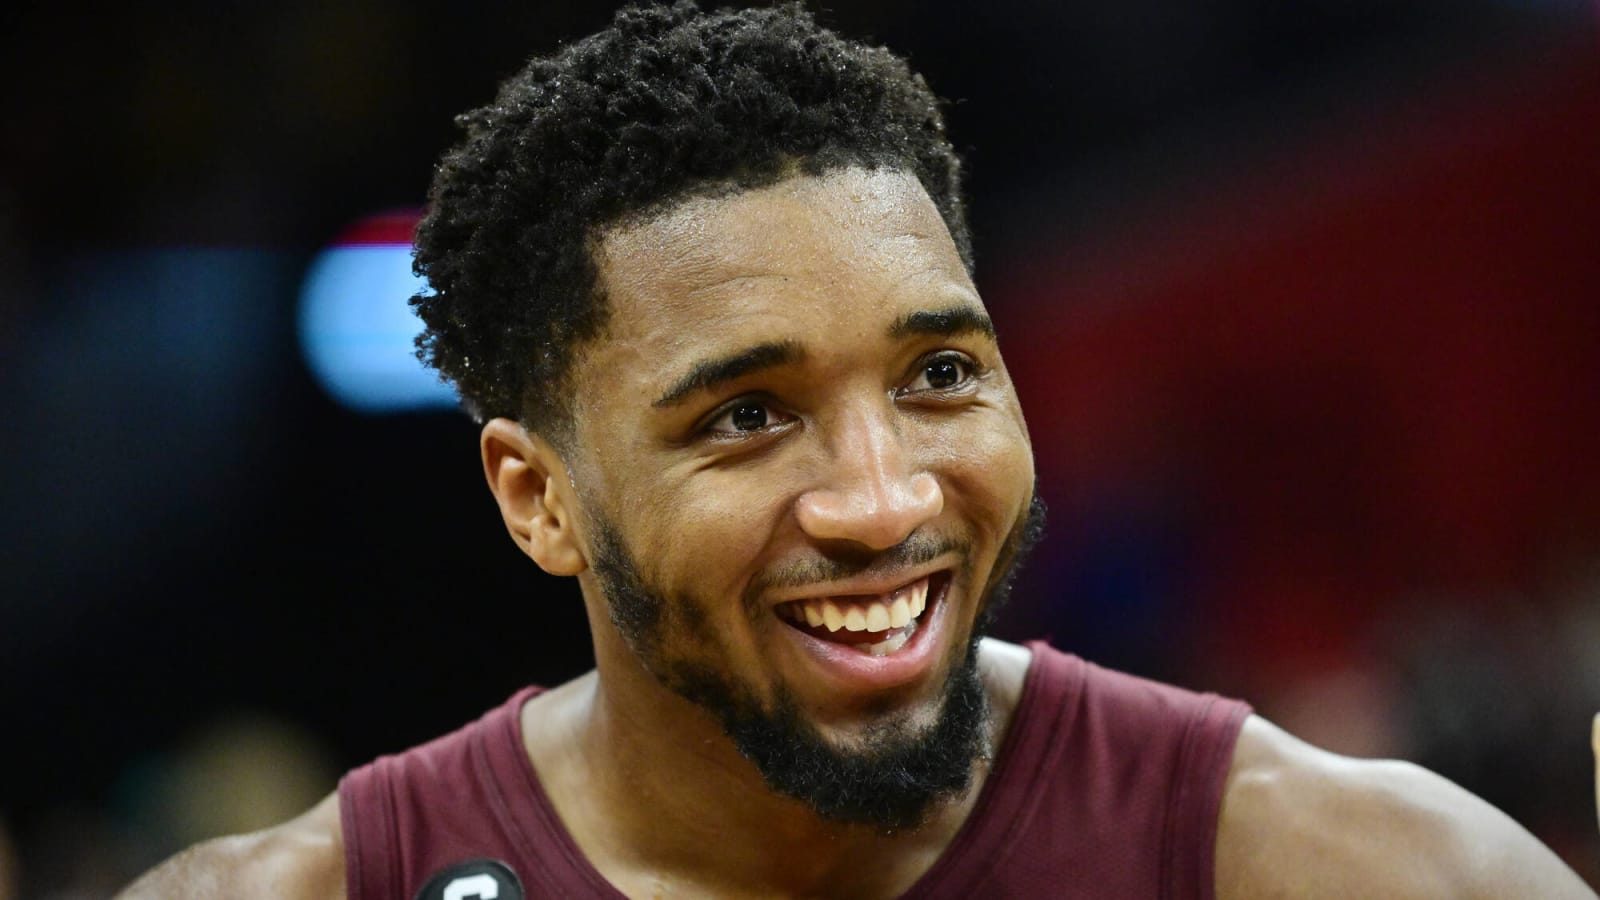 Reportedly promised by Cavaliers he'd be traded or bought out last